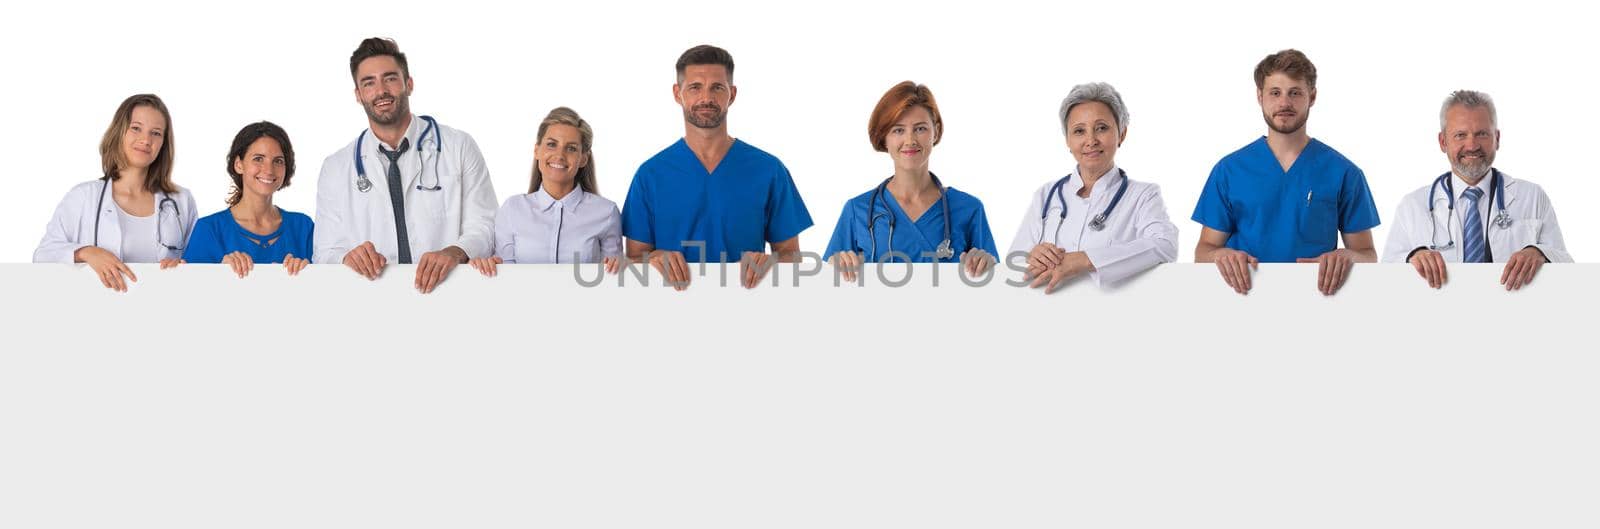 Group of doctors with blank banner by ALotOfPeople